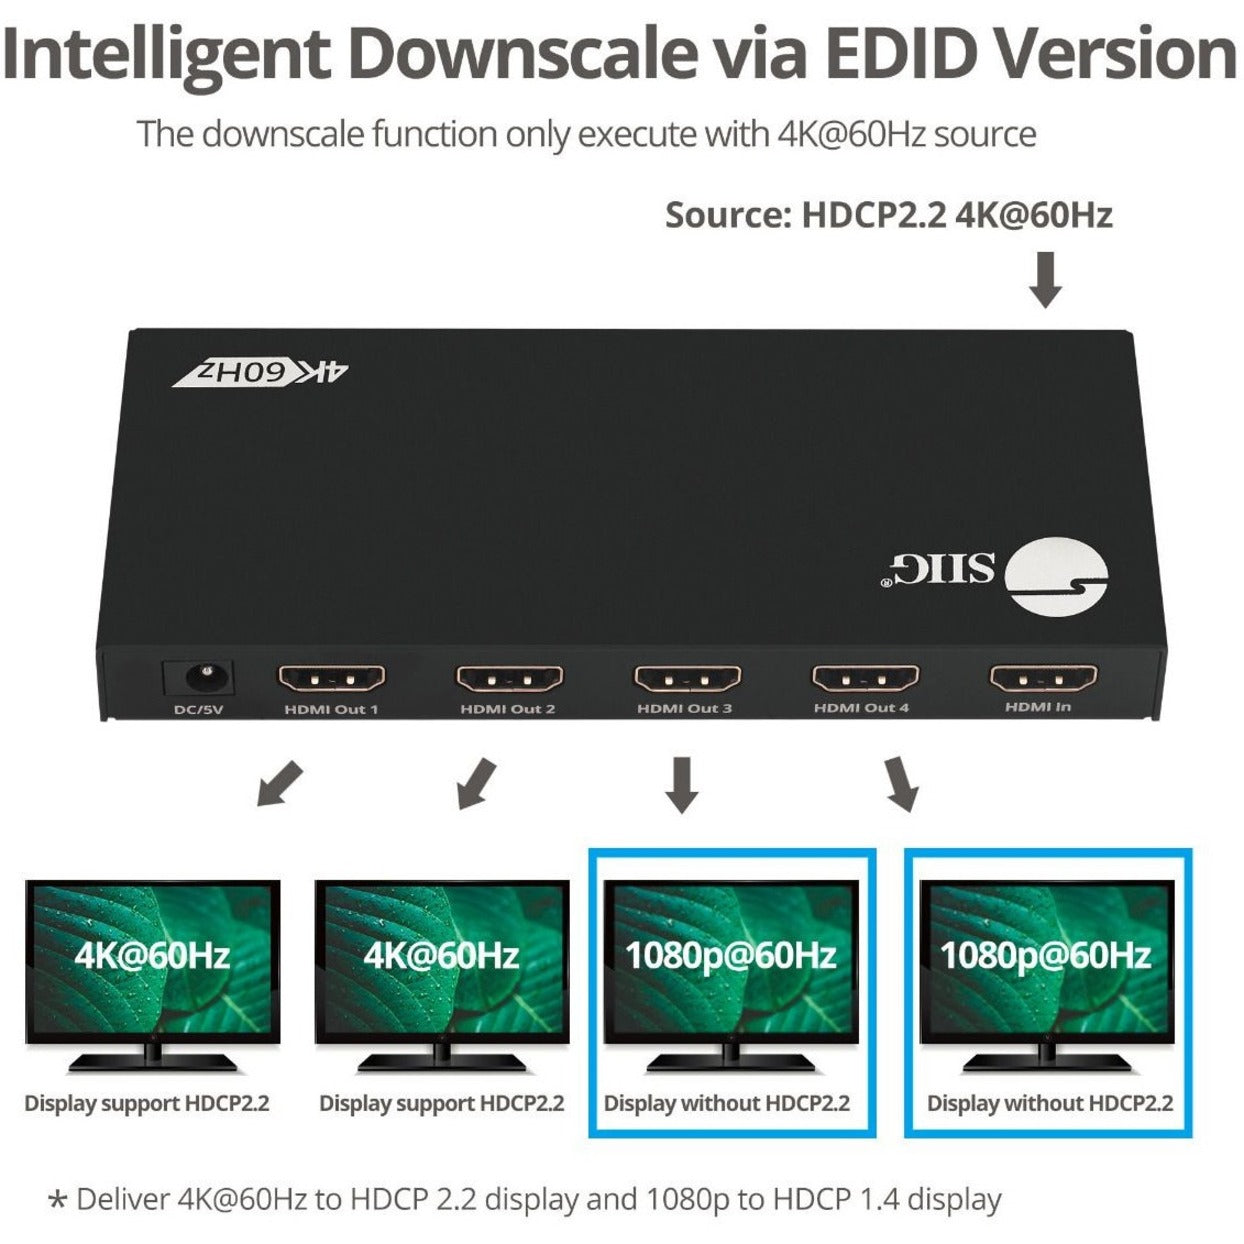 SIIG CE-H26C11-S1 4 Port HDMI 2.0 HDR Splitter with EDID and Downscaler, 4K Video Resolution, 2-Year Warranty